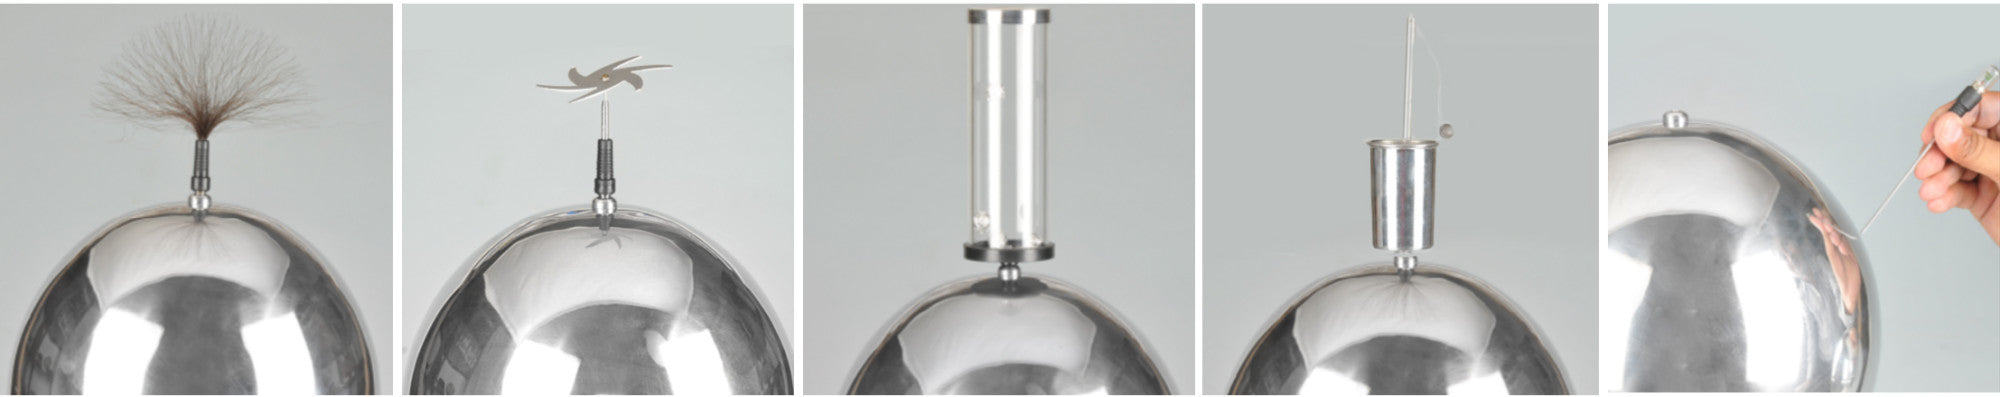 7 Piece Electrostatics Accessories Kit - Designed to be used with Eisco Labs Van De Graaff And Wimshurst Machines